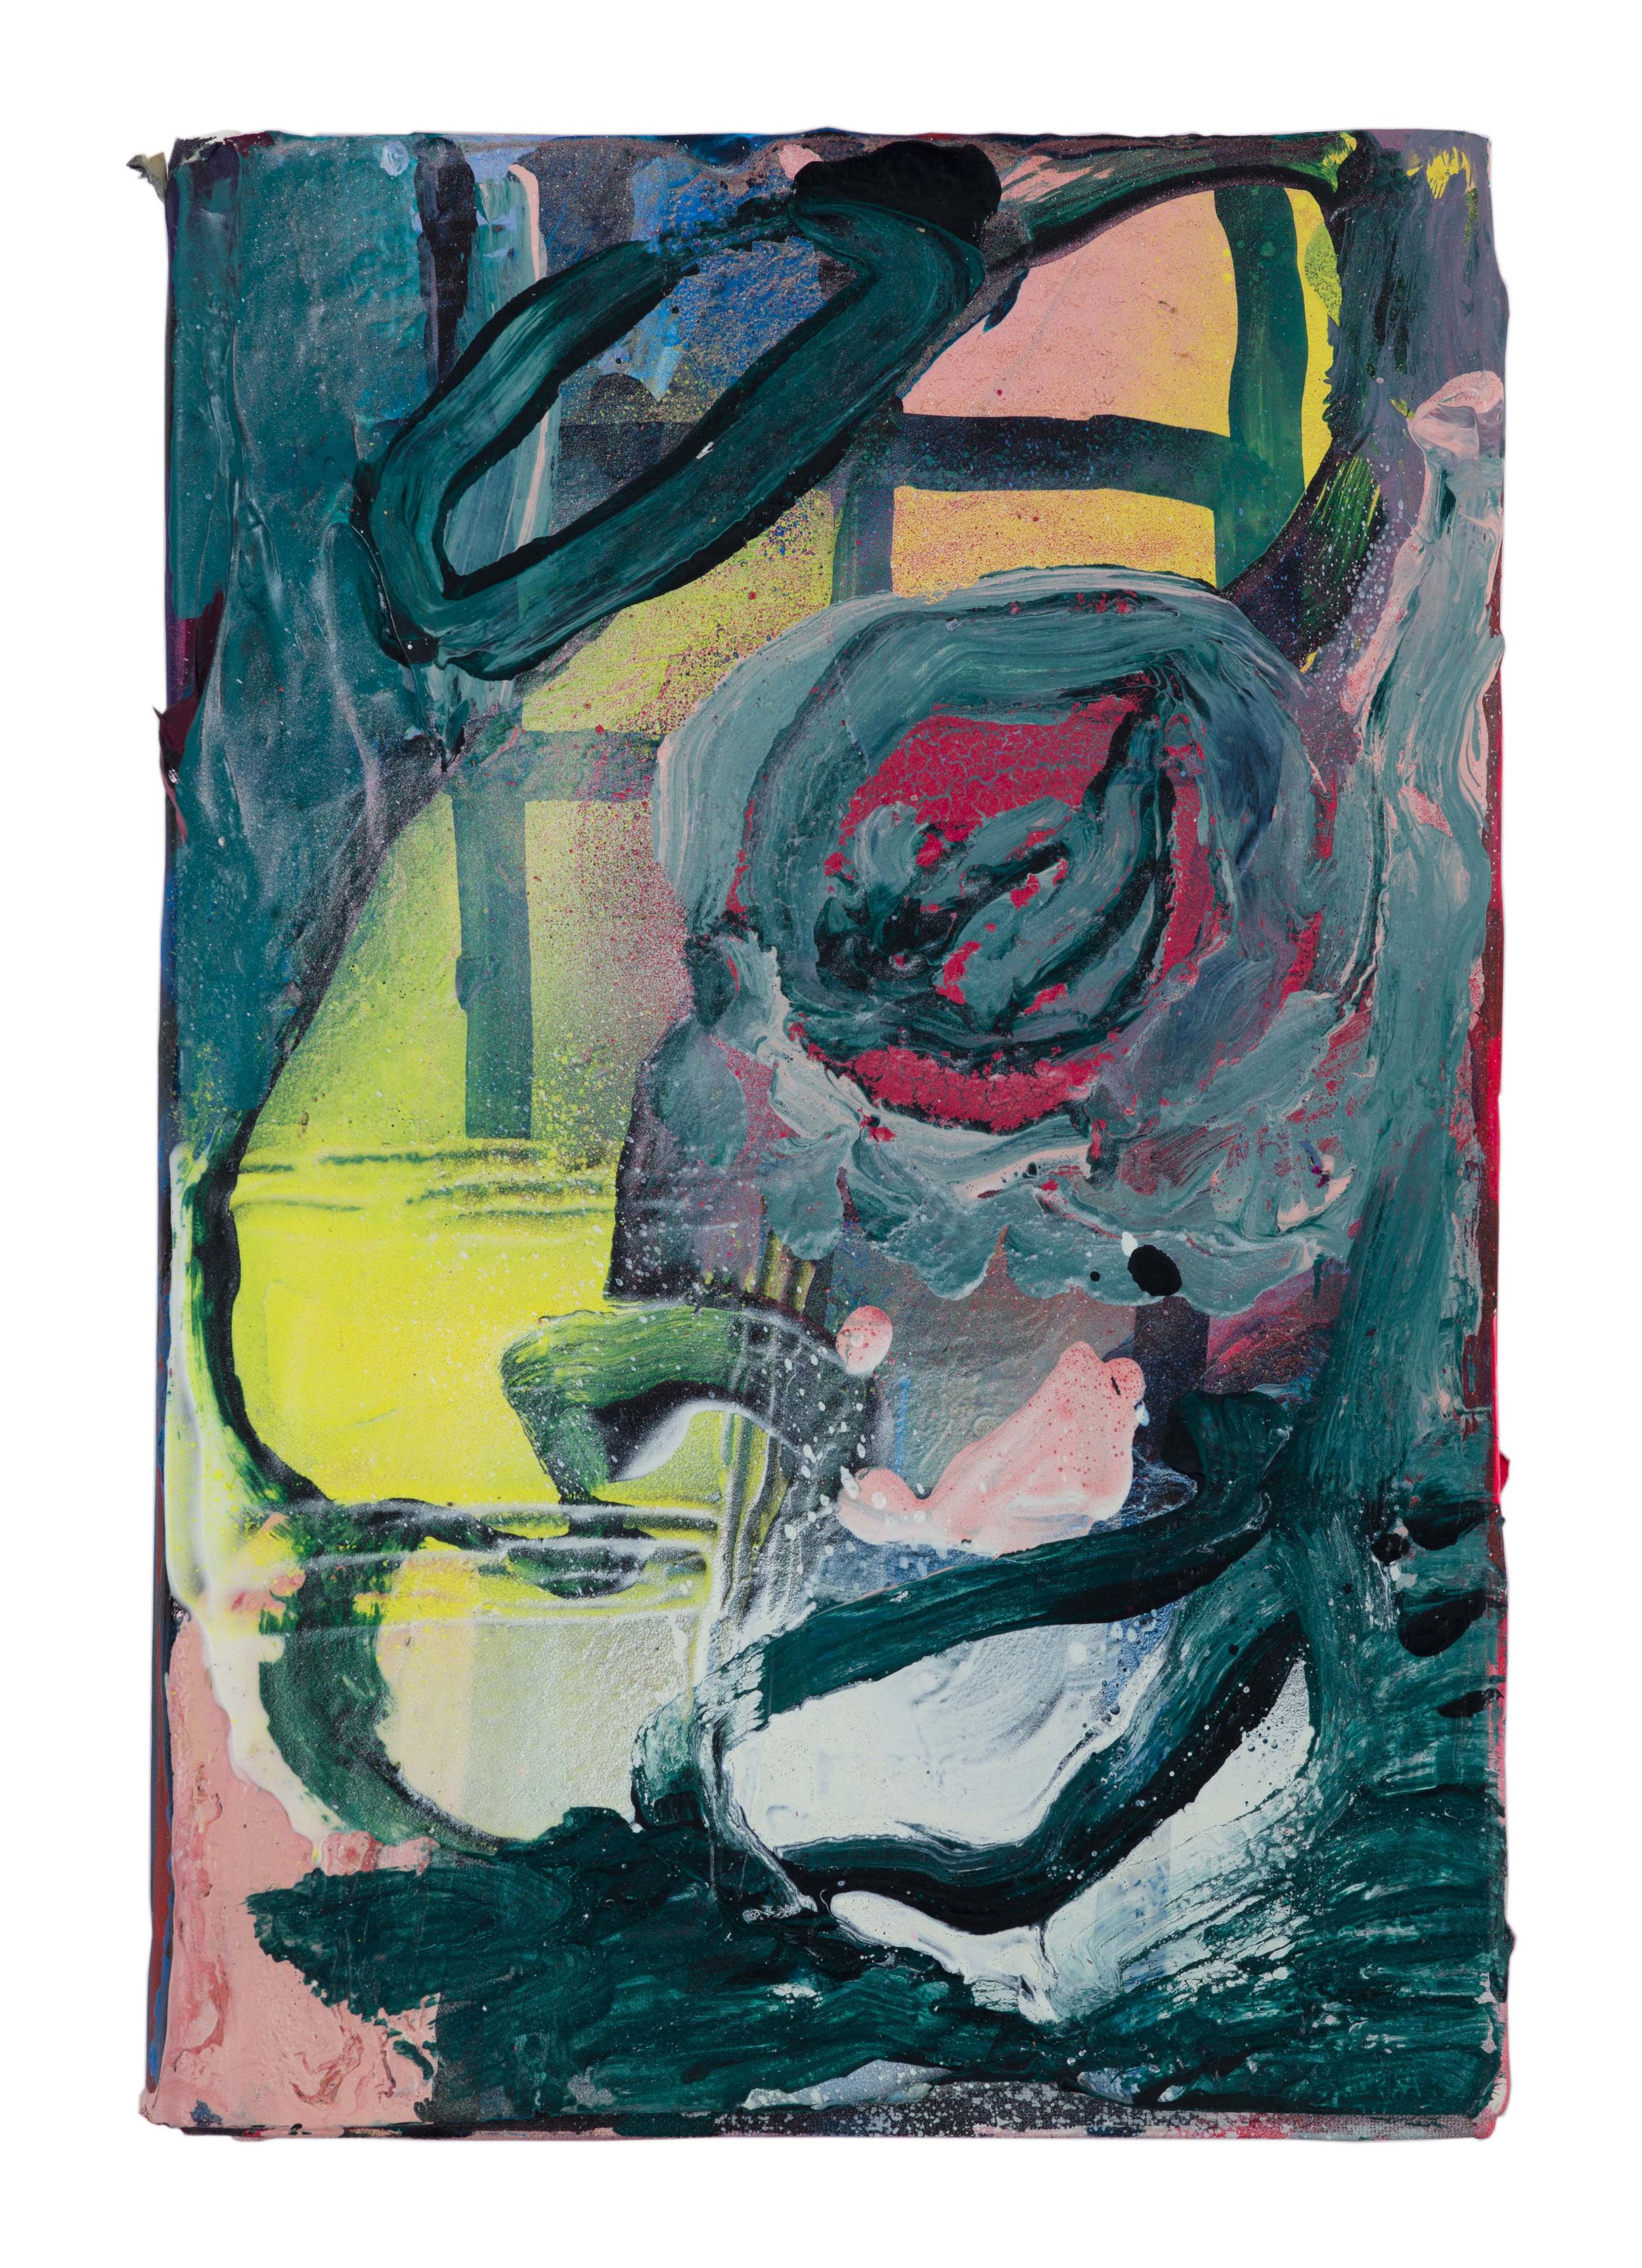  Drew Beattie and Ben Shepard  Thomas Hardy: A Biography  acrylic and spray paint on used book 2016 9 ½ x 6 ½ inches 